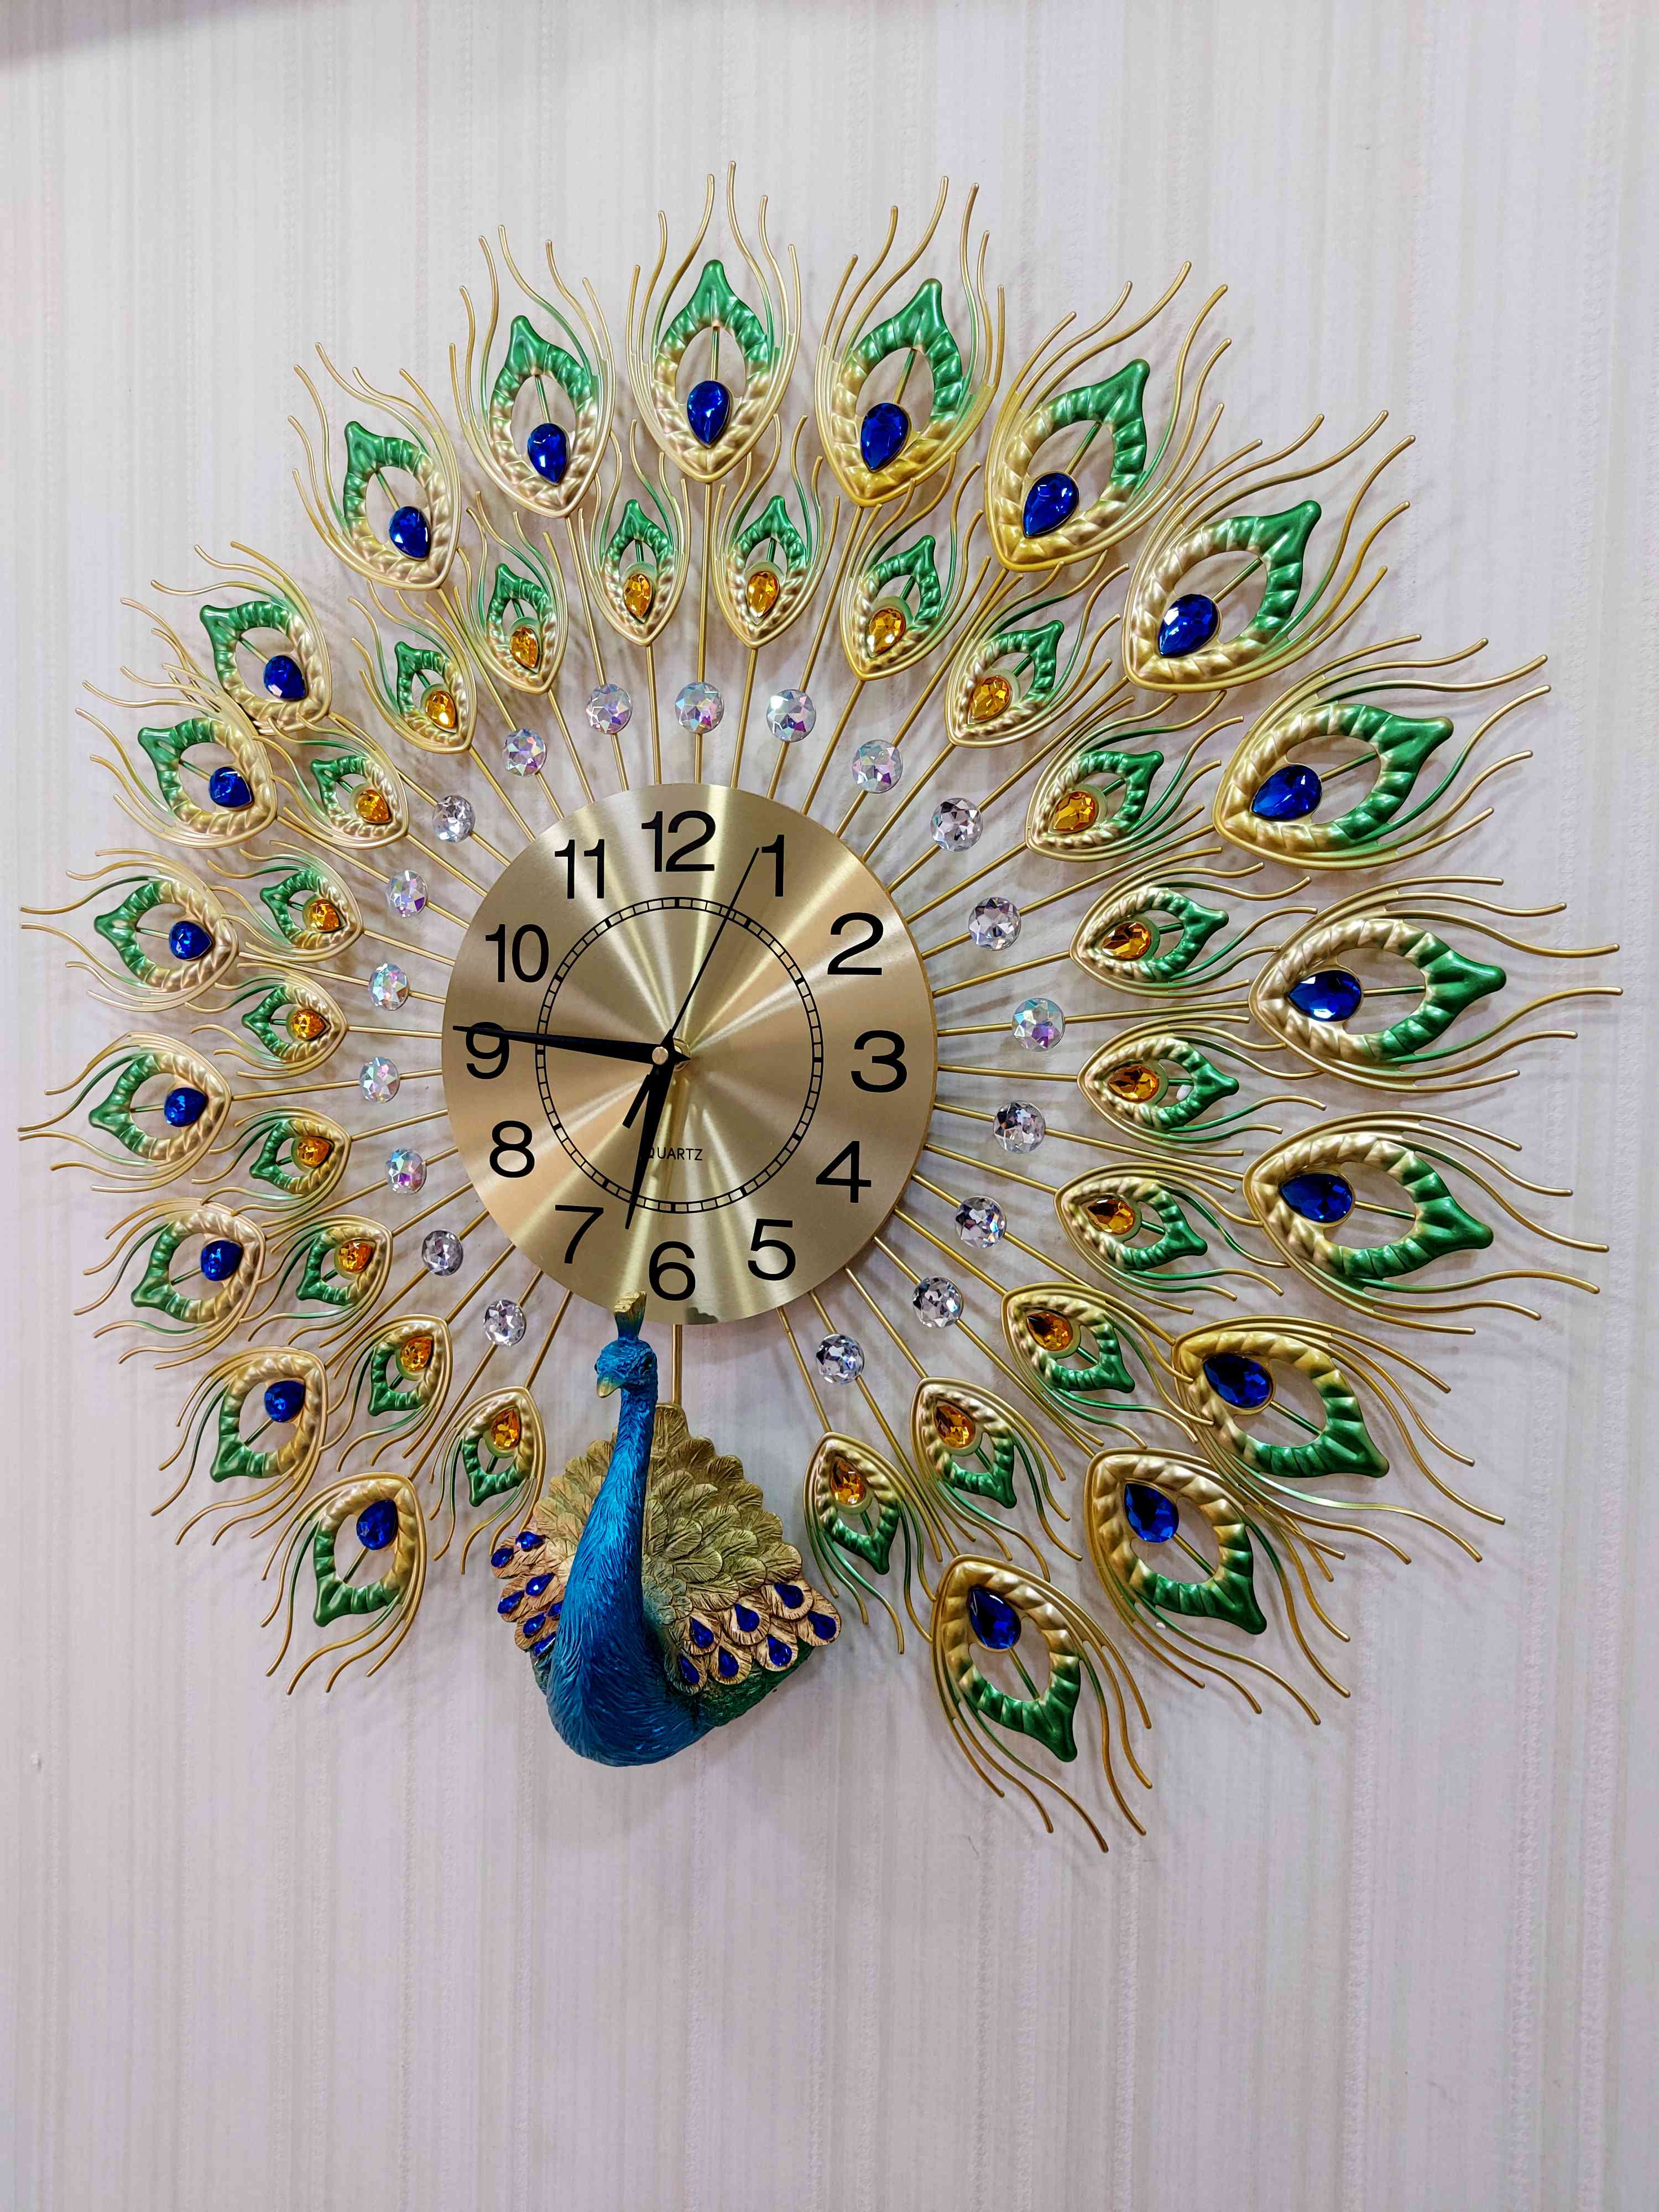 FunkyTradition 3D Peacock Feather Open Wall Clock, Wall Watch, Wall Decor for Home Office Decor and Gifts 60 CM Tall